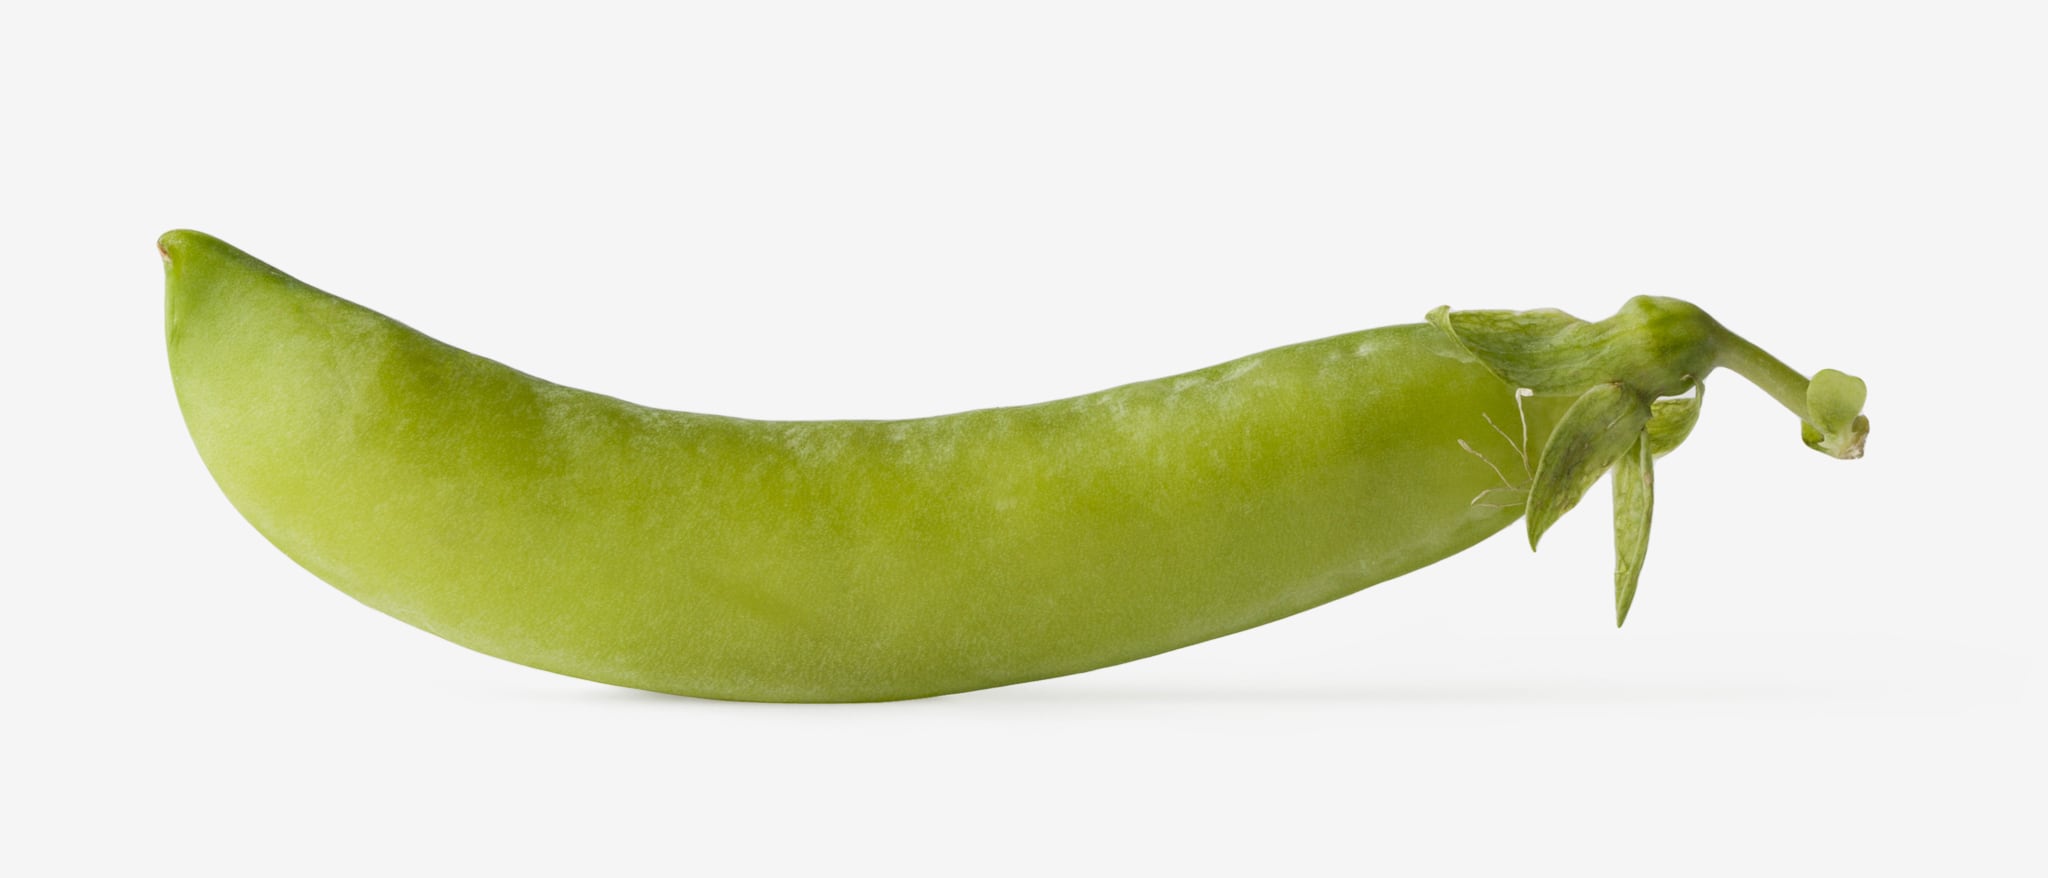 Green pea image asset with transparent background